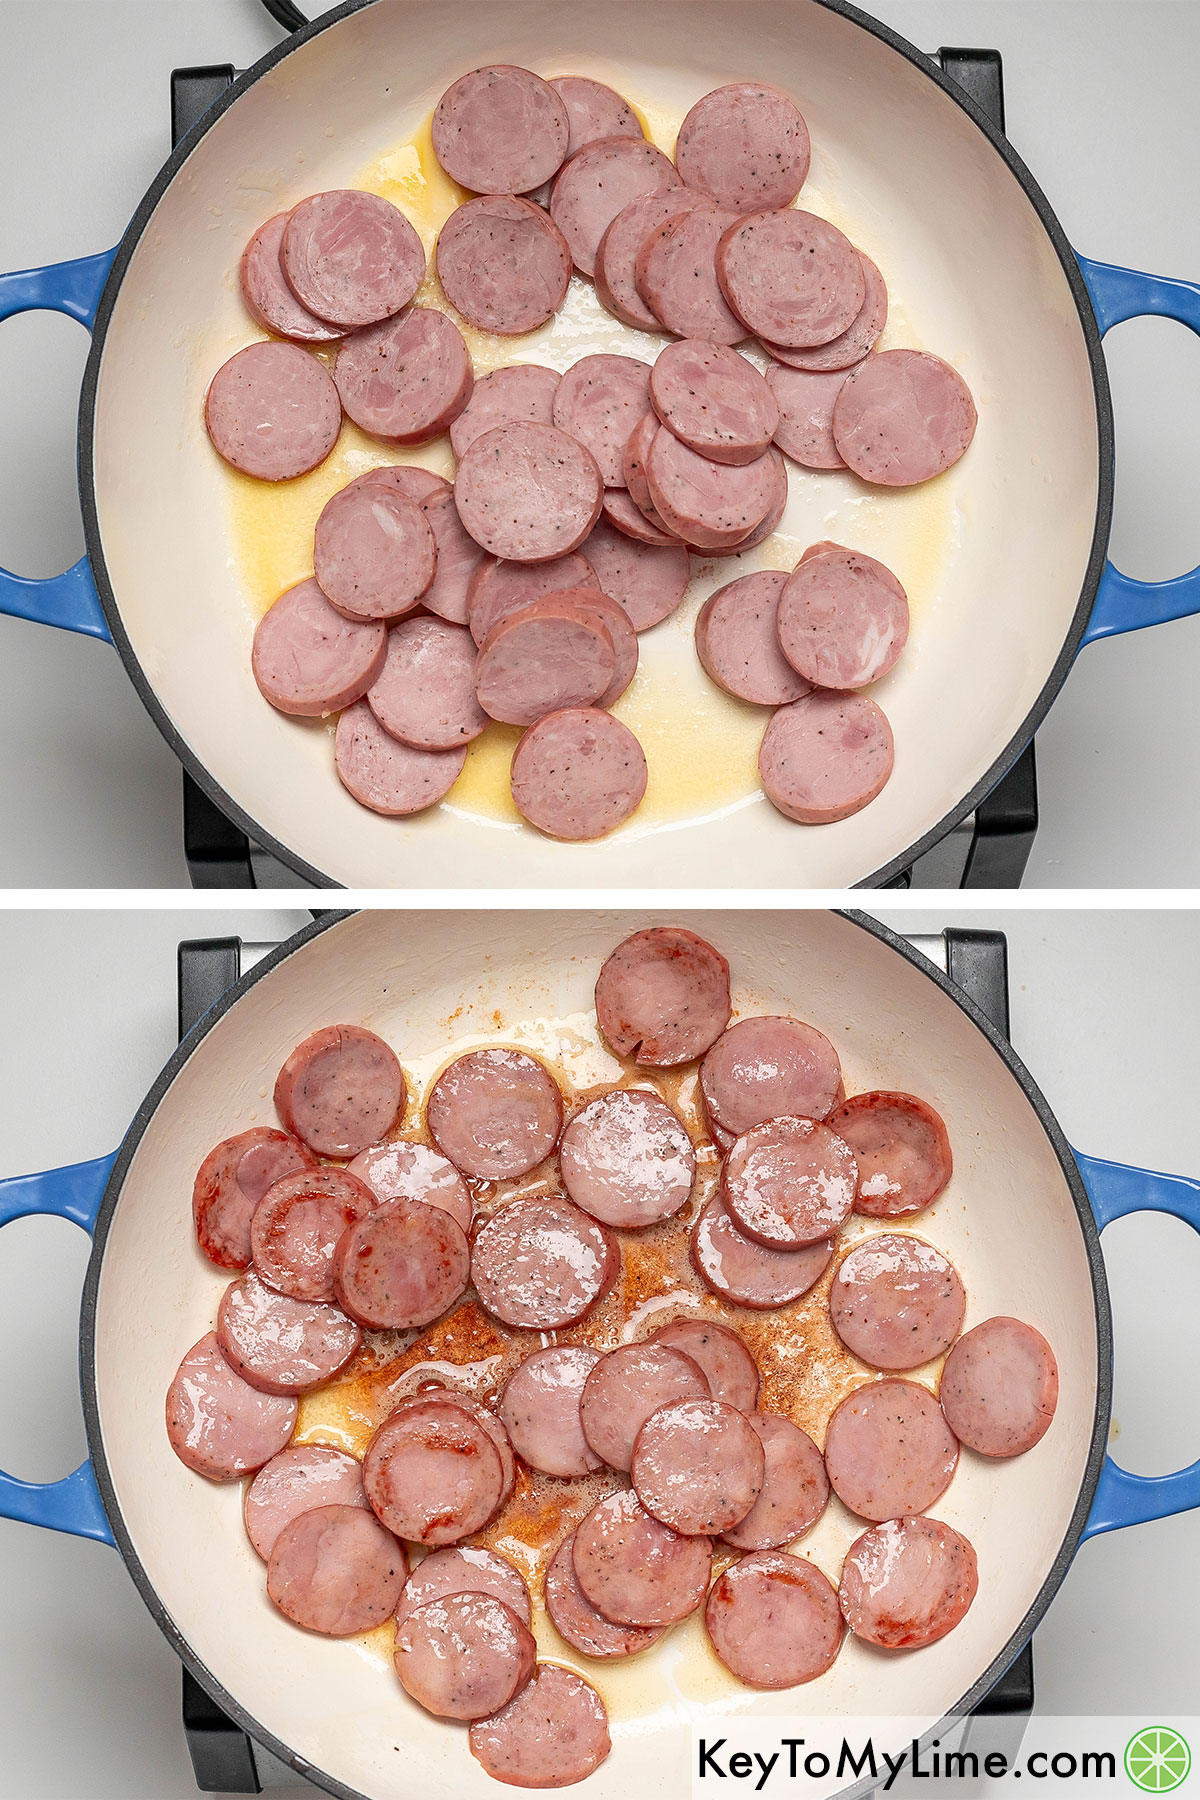 Adding kielbasa to the heated skillet with butter, and then cooking until browned.